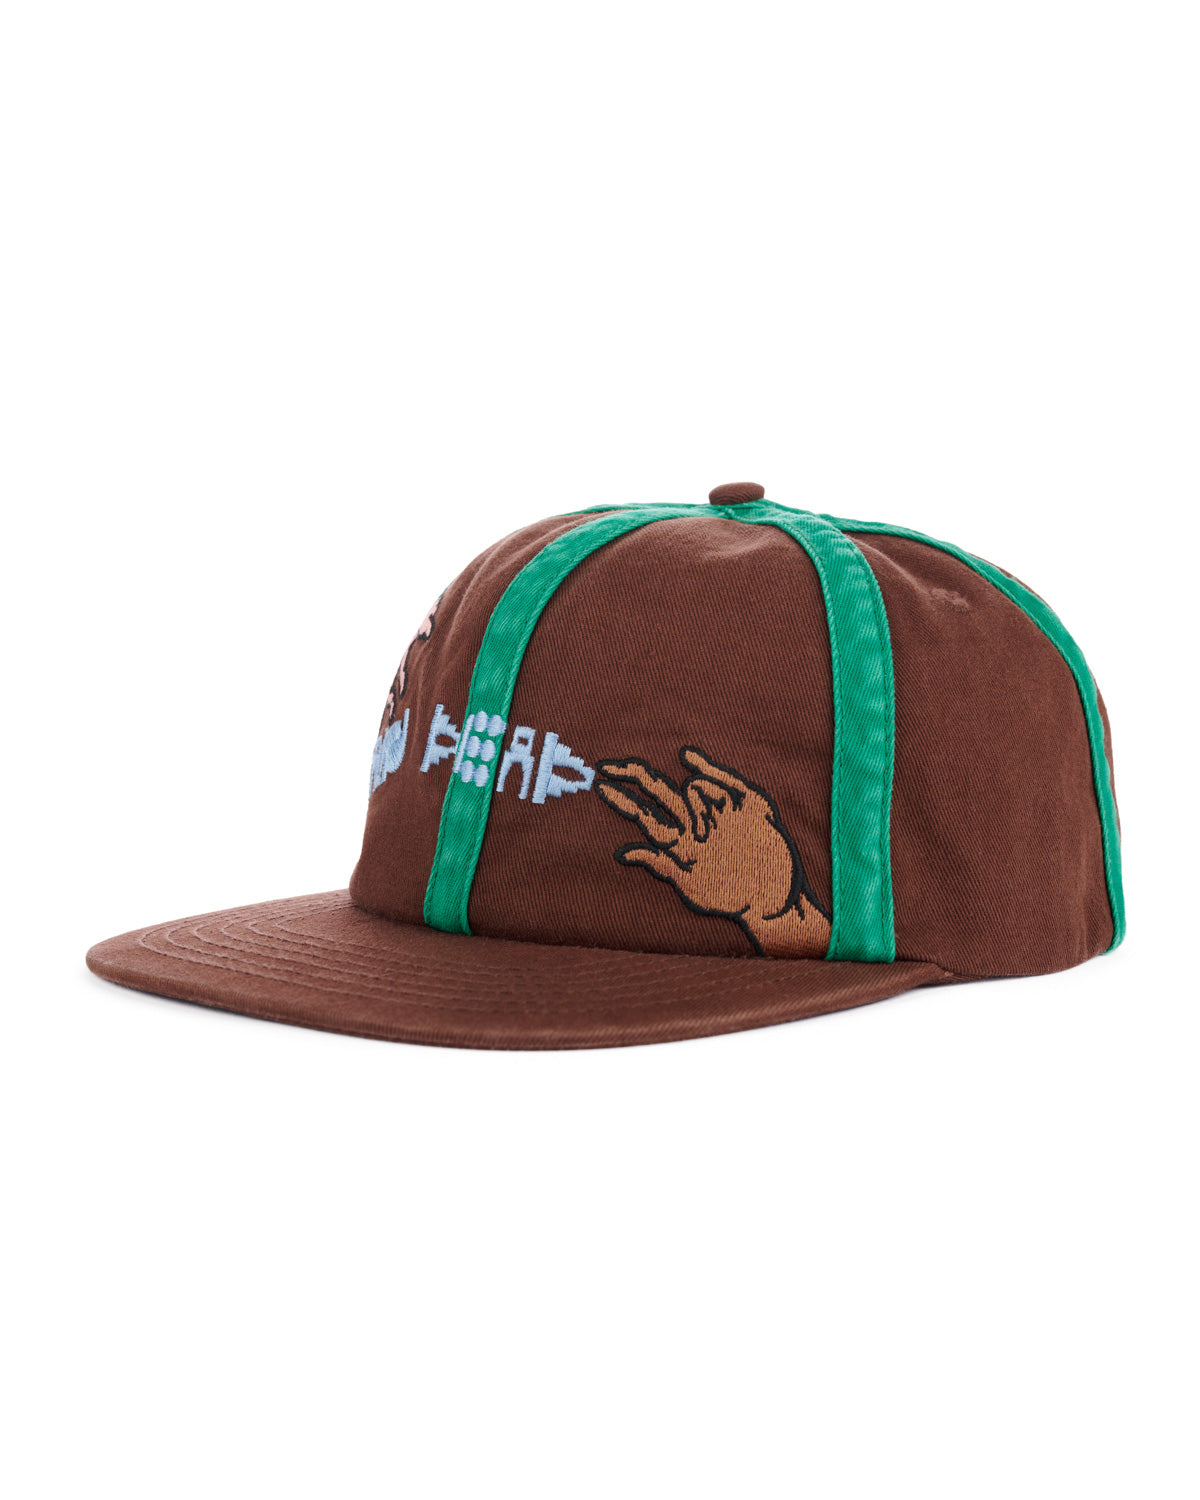 Connection 6 Panel Twill Hat - Brown 2